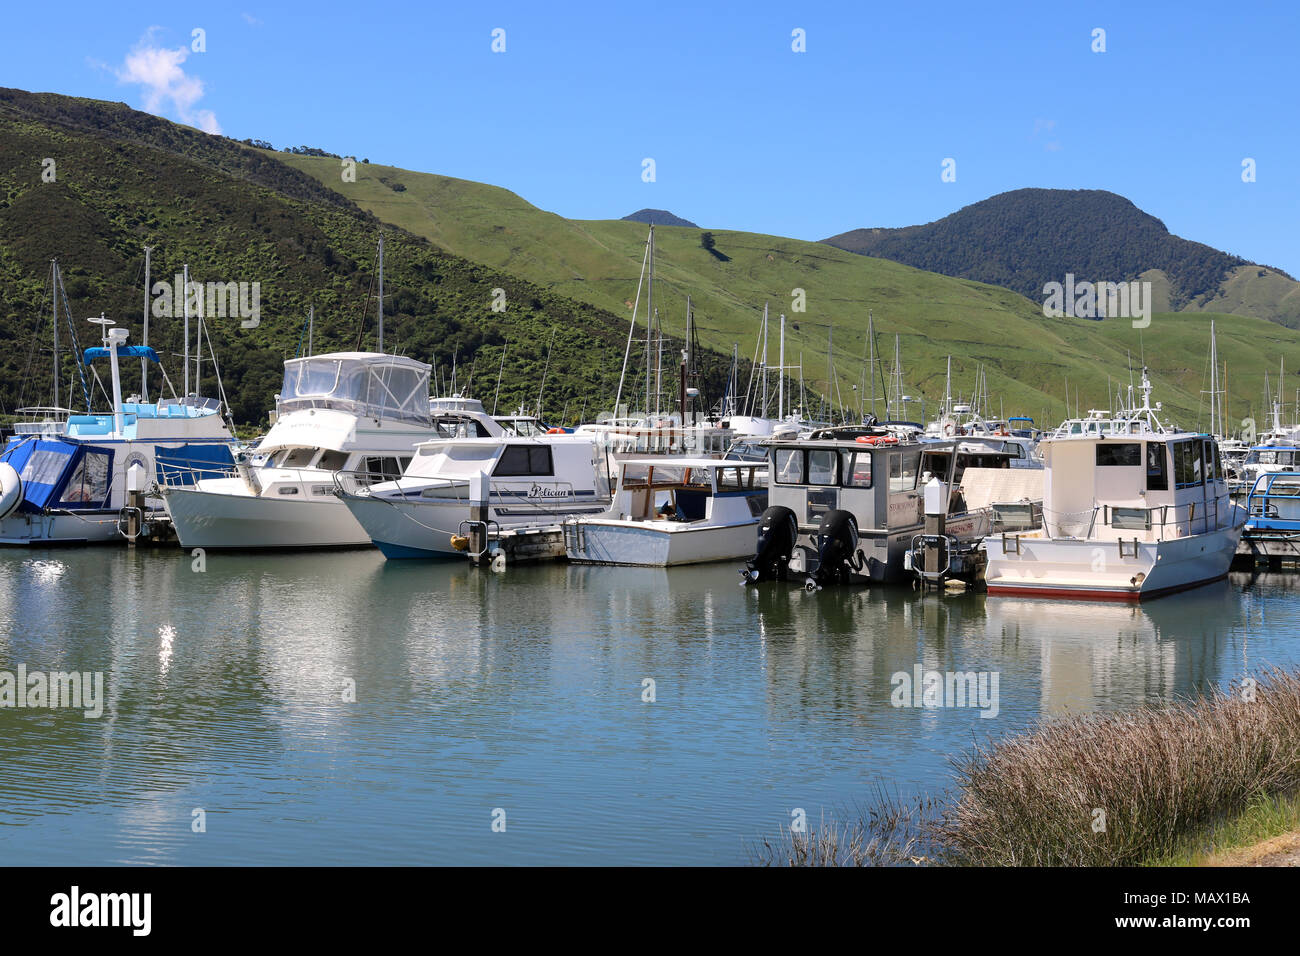 View of boats and yachts in the marina at Havelock on Pelorus Sound, Marlborough region, South Island, New Zealand Stock Photo